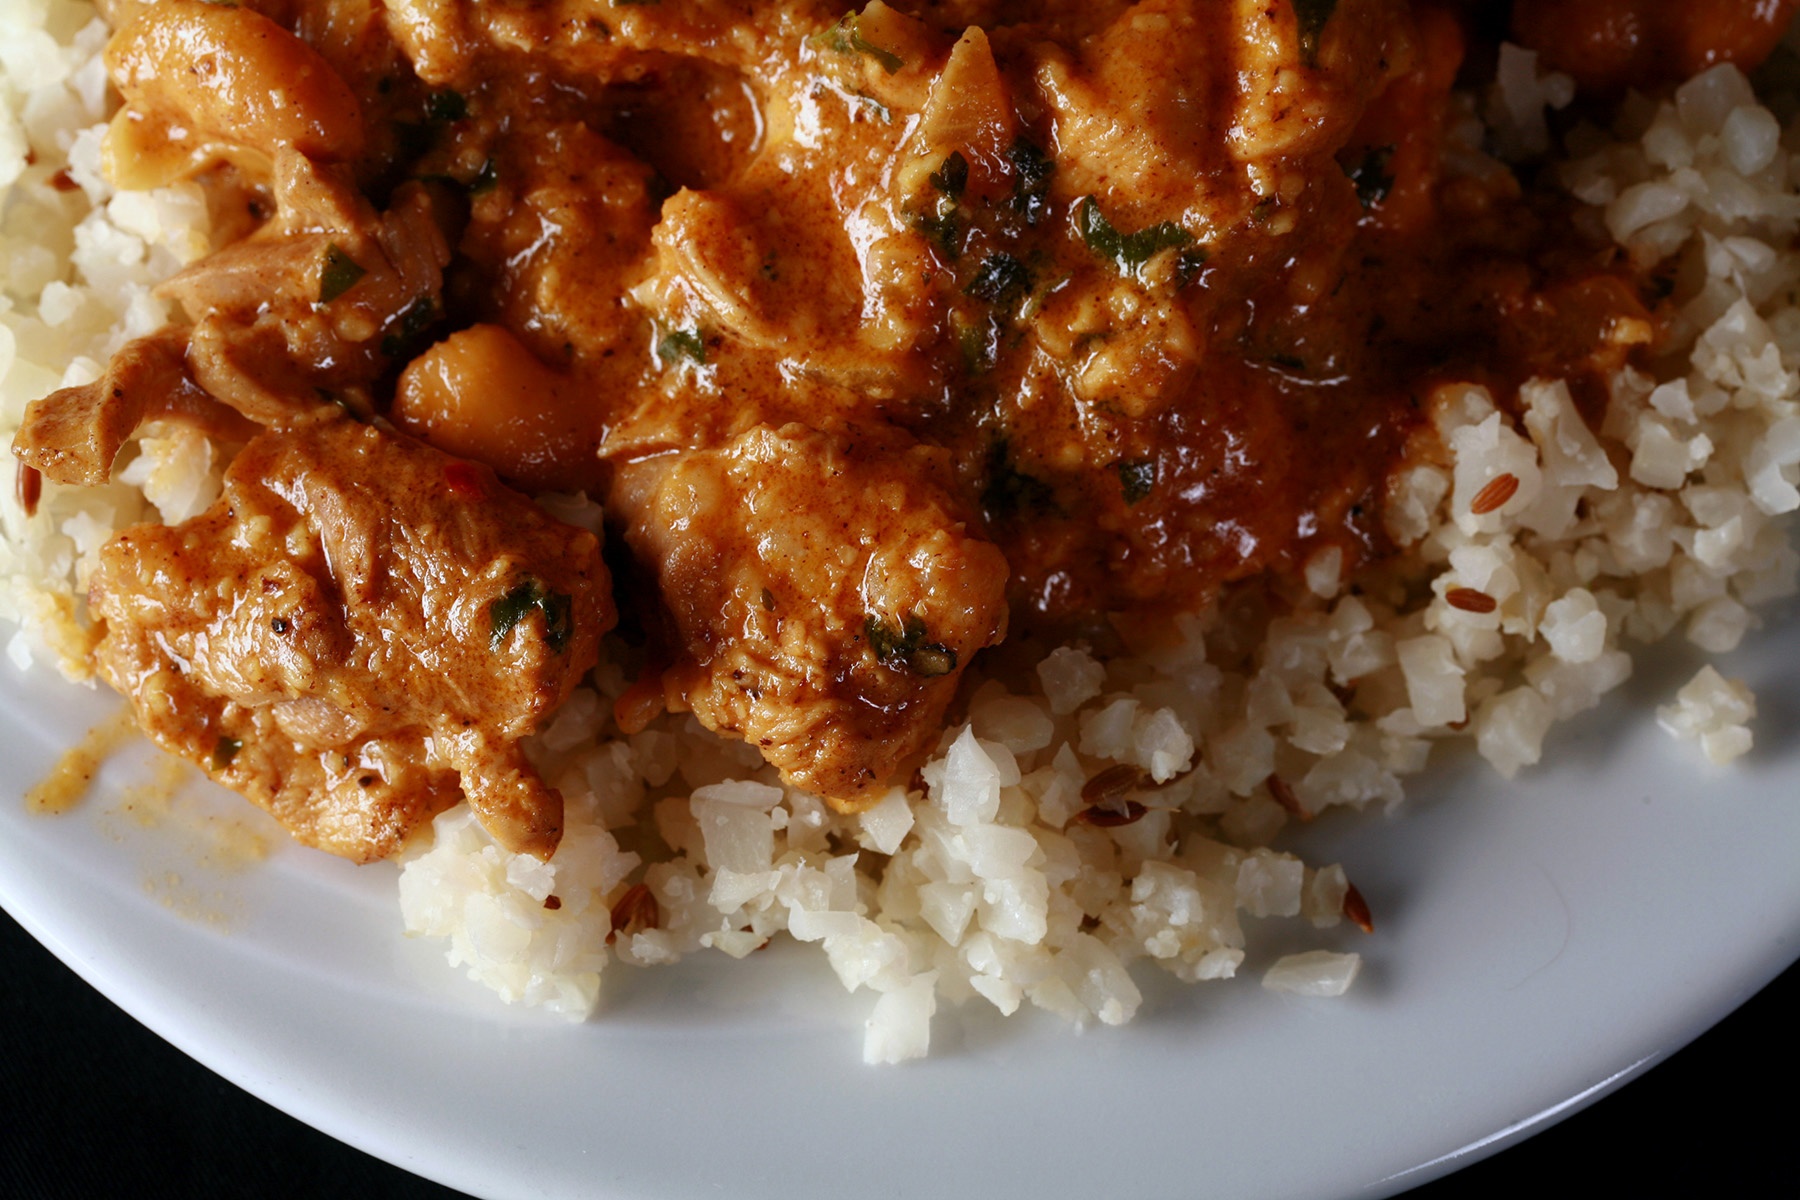 A plate of low carb chicken korma, served on a bed of jeera rice made from cauliflower.